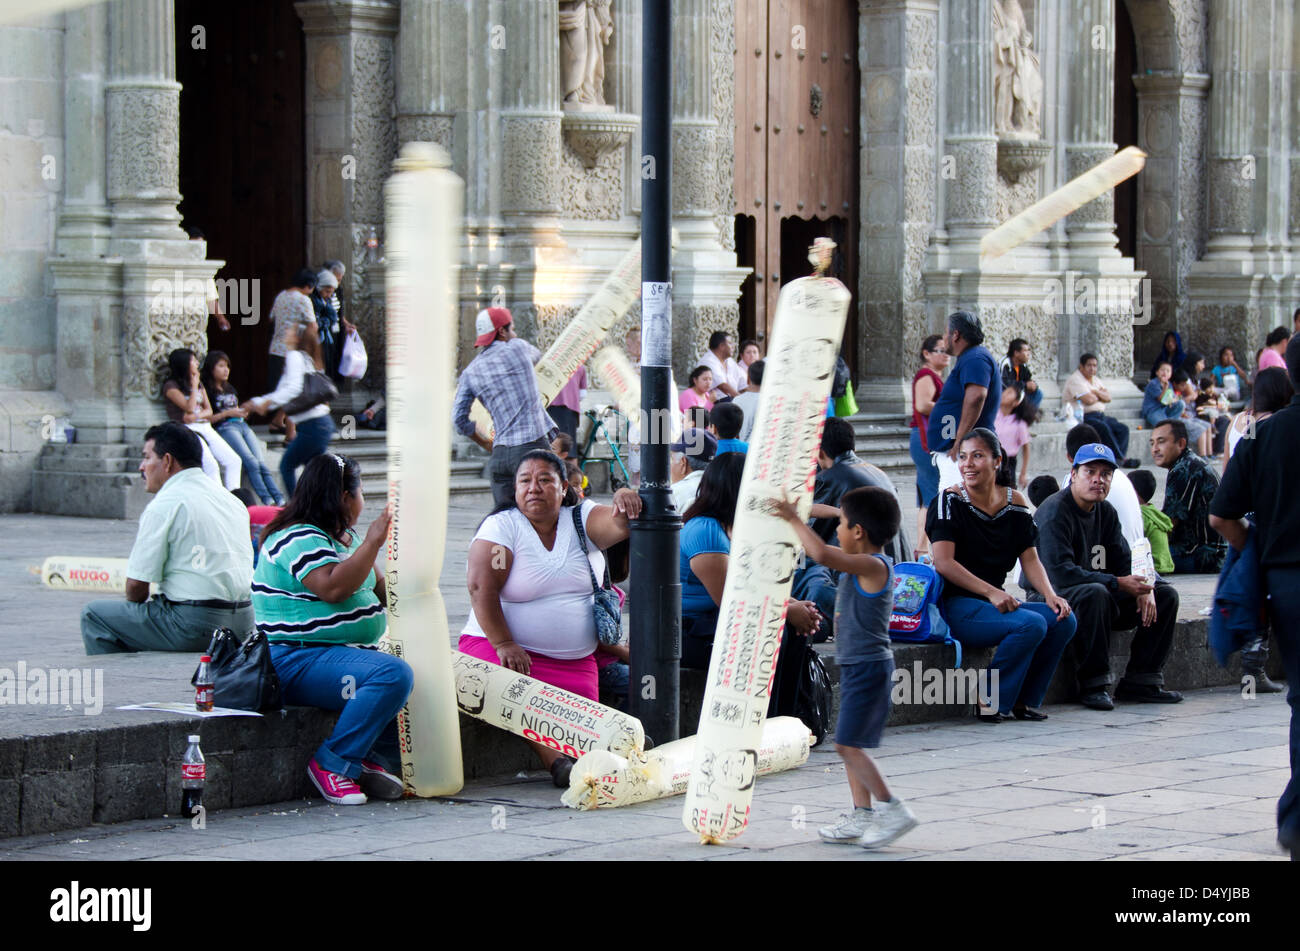 Children play with inflatable political advertising toys as adults talk and watch the street life in the Zócalo, Oaxaca, Mexico. Stock Photo